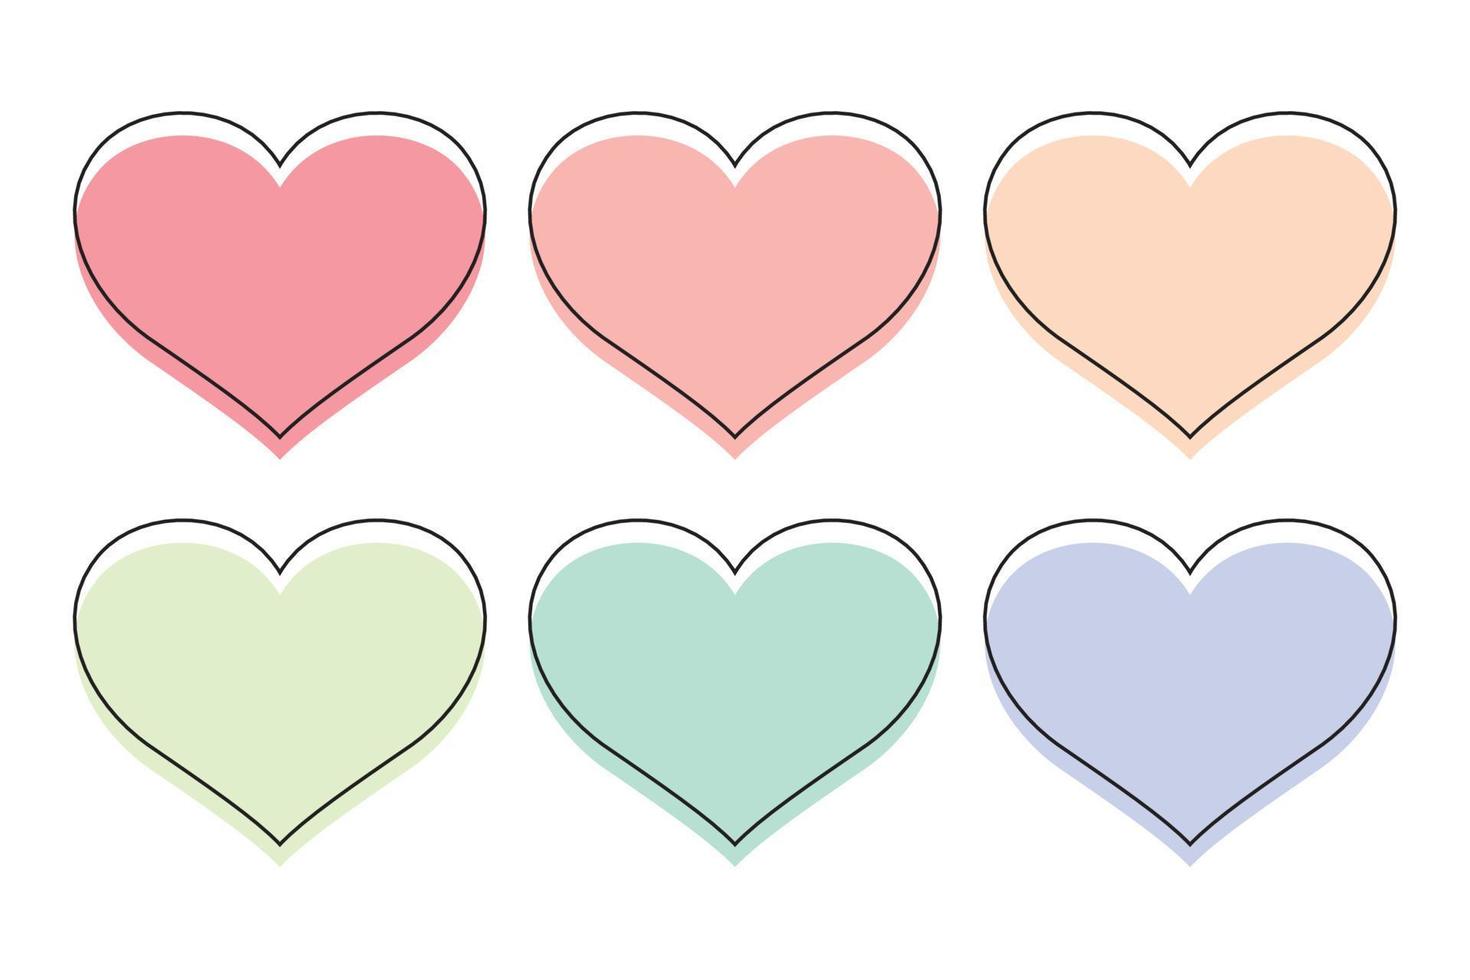 Collection of hand drawn hearts vector